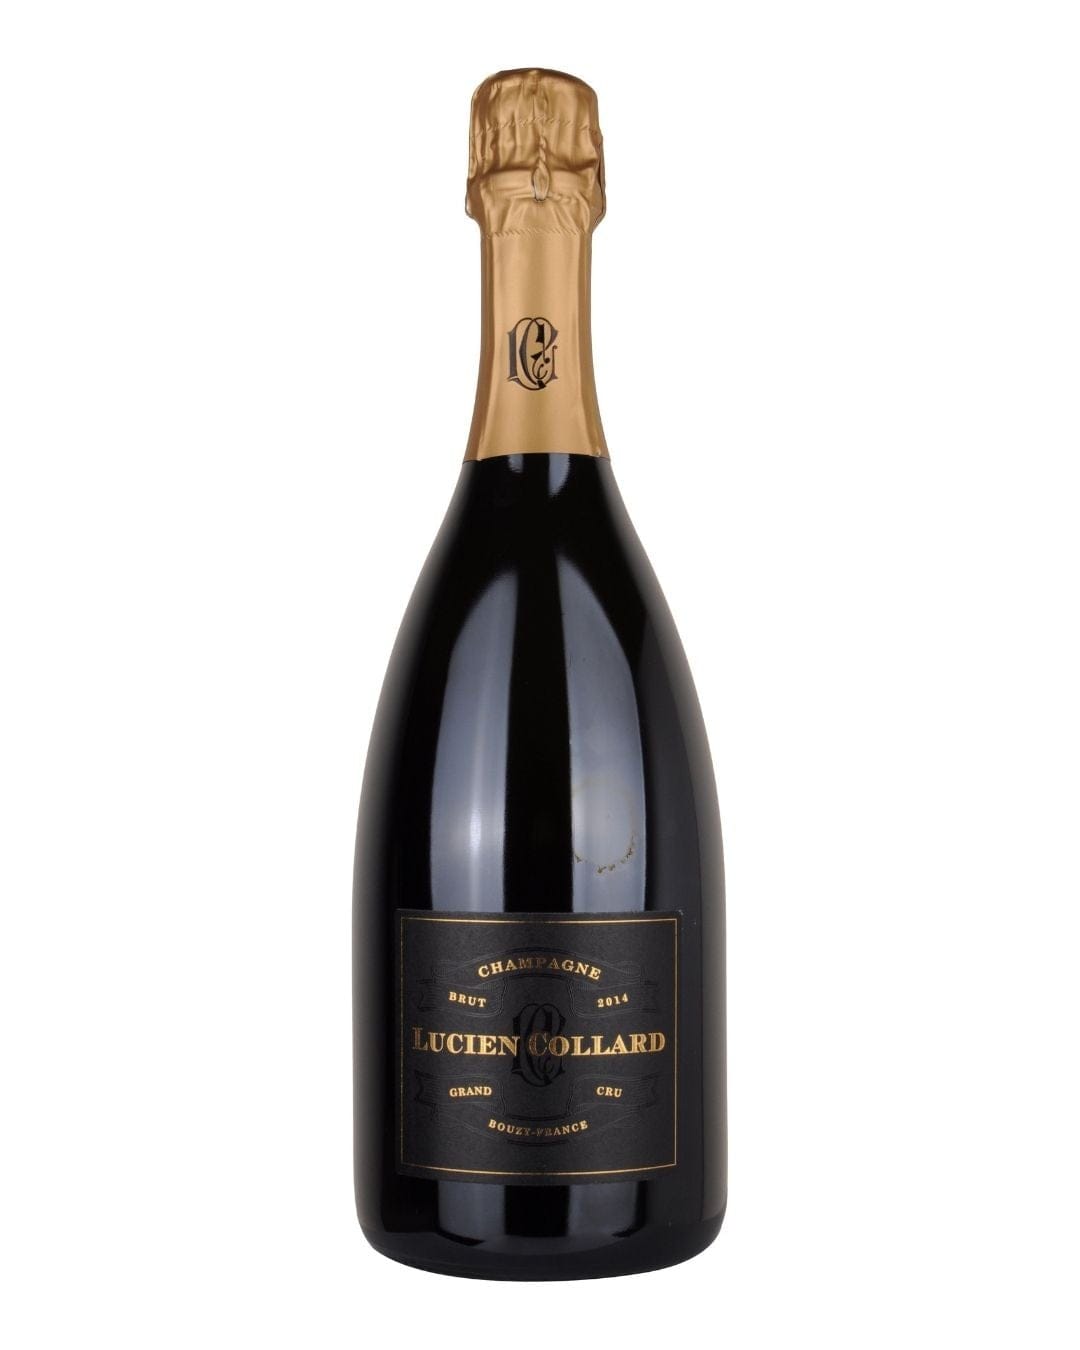 Shop Champagne Lucien Collard Champagne Lucien Collard Grand Cru Brut 2014 online at PENTICTON artisanal French wine store in Hong Kong. Discover other French wines, promotions, workshops and featured offers at pentictonpacific.com 